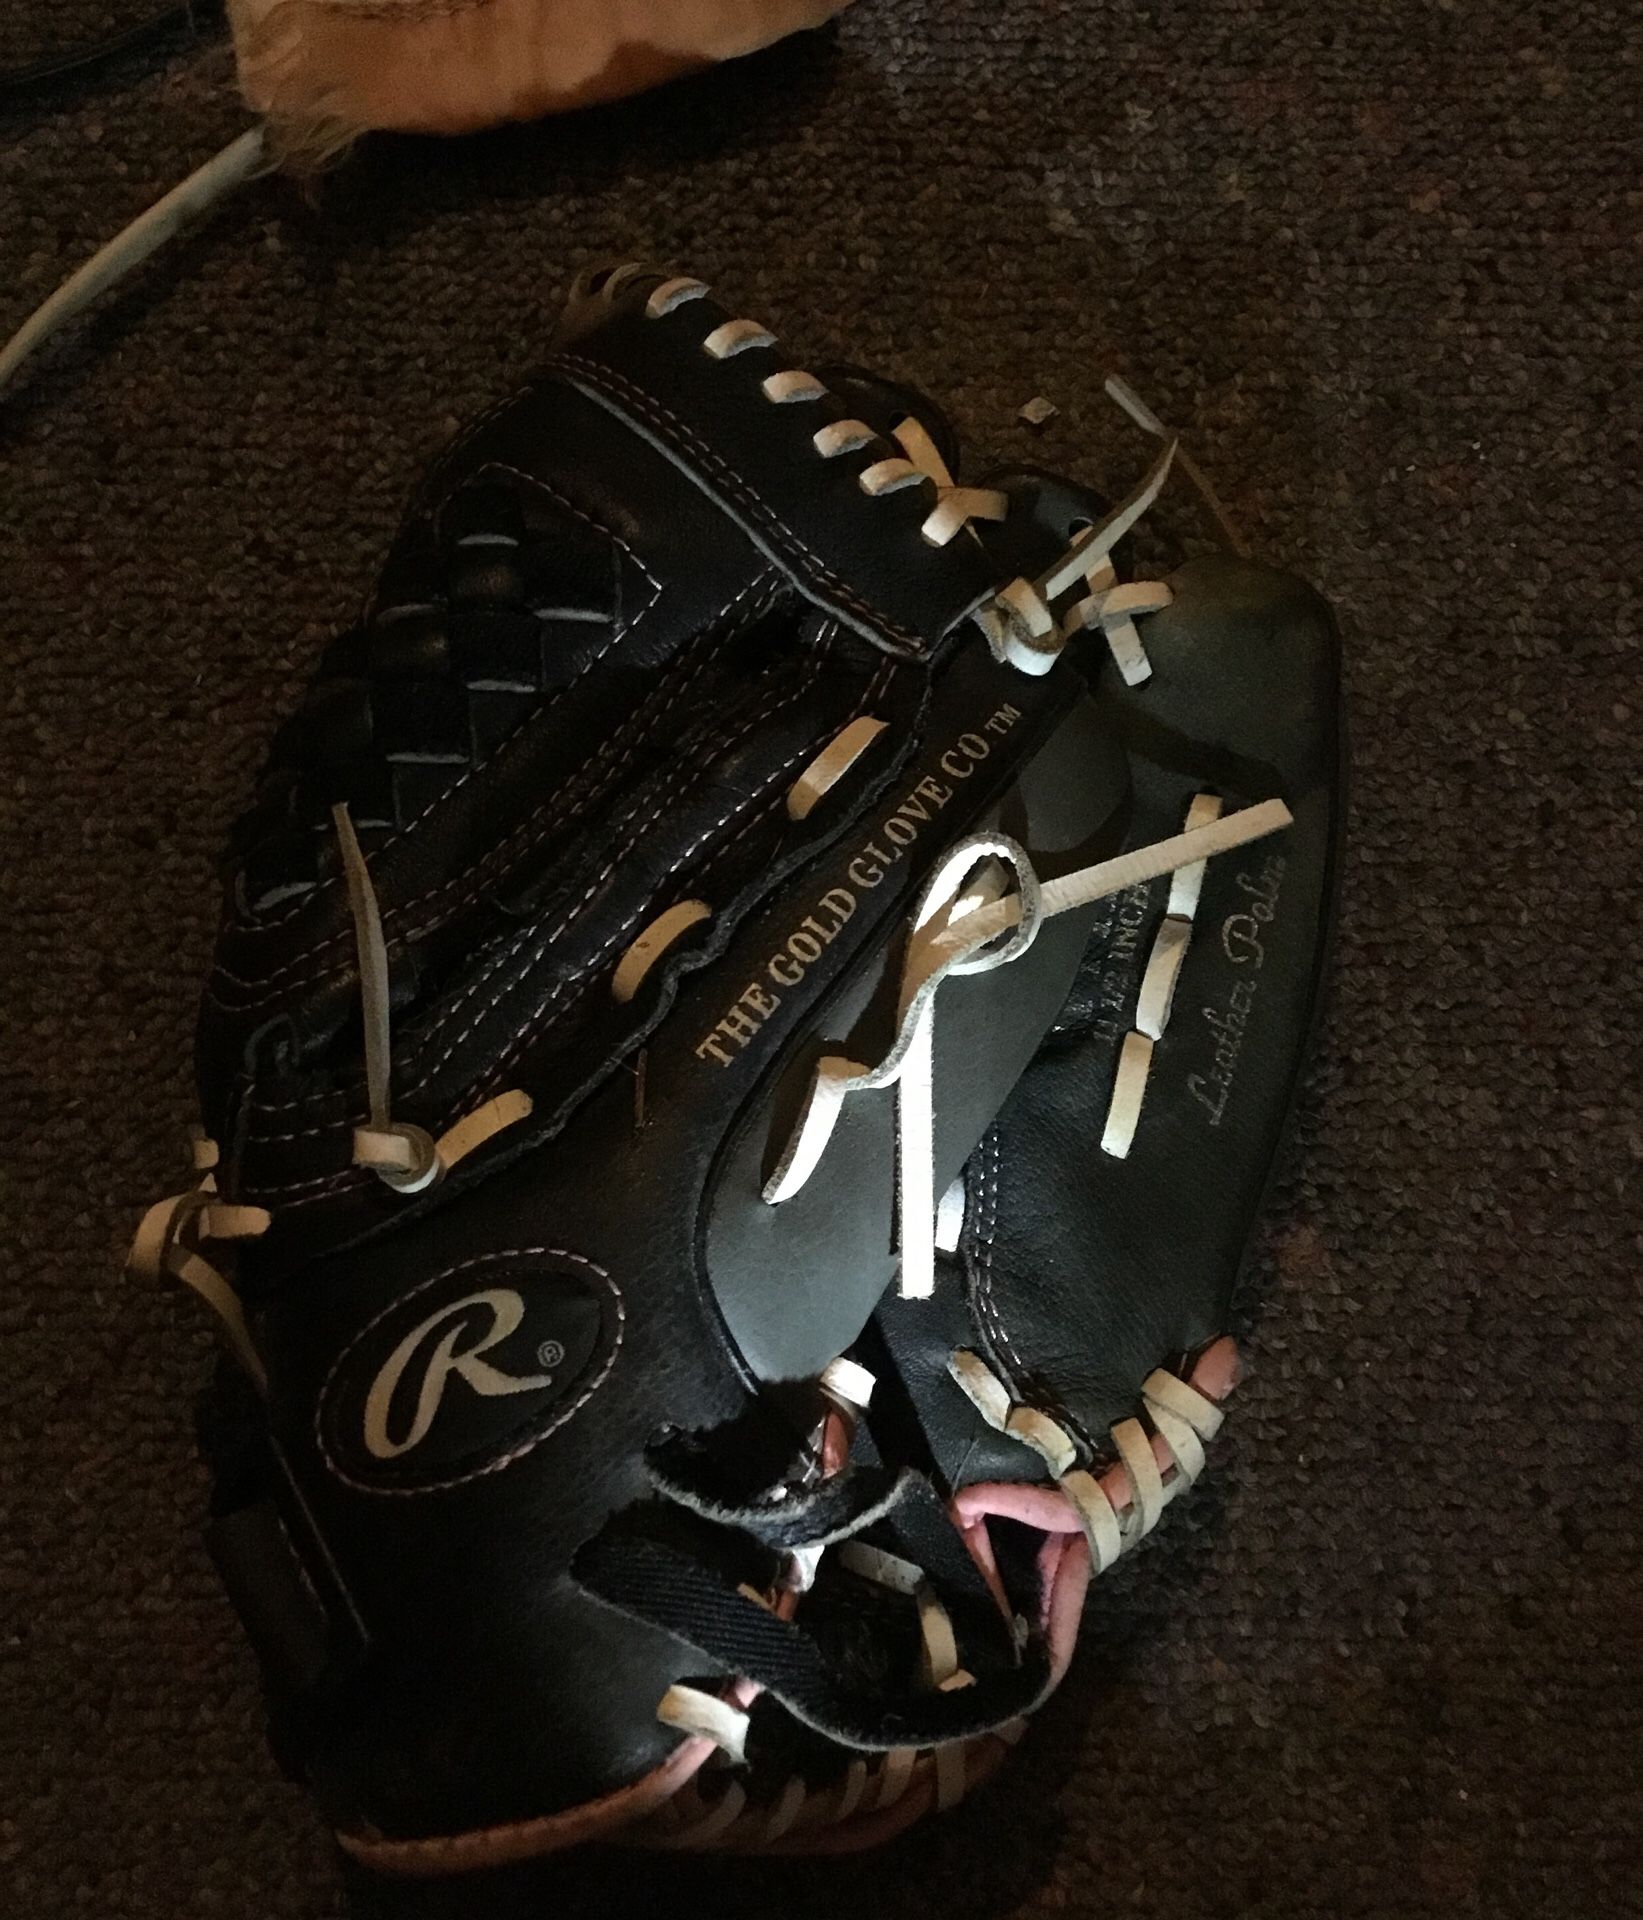 Rawlings official baseball glove suitable for a woman